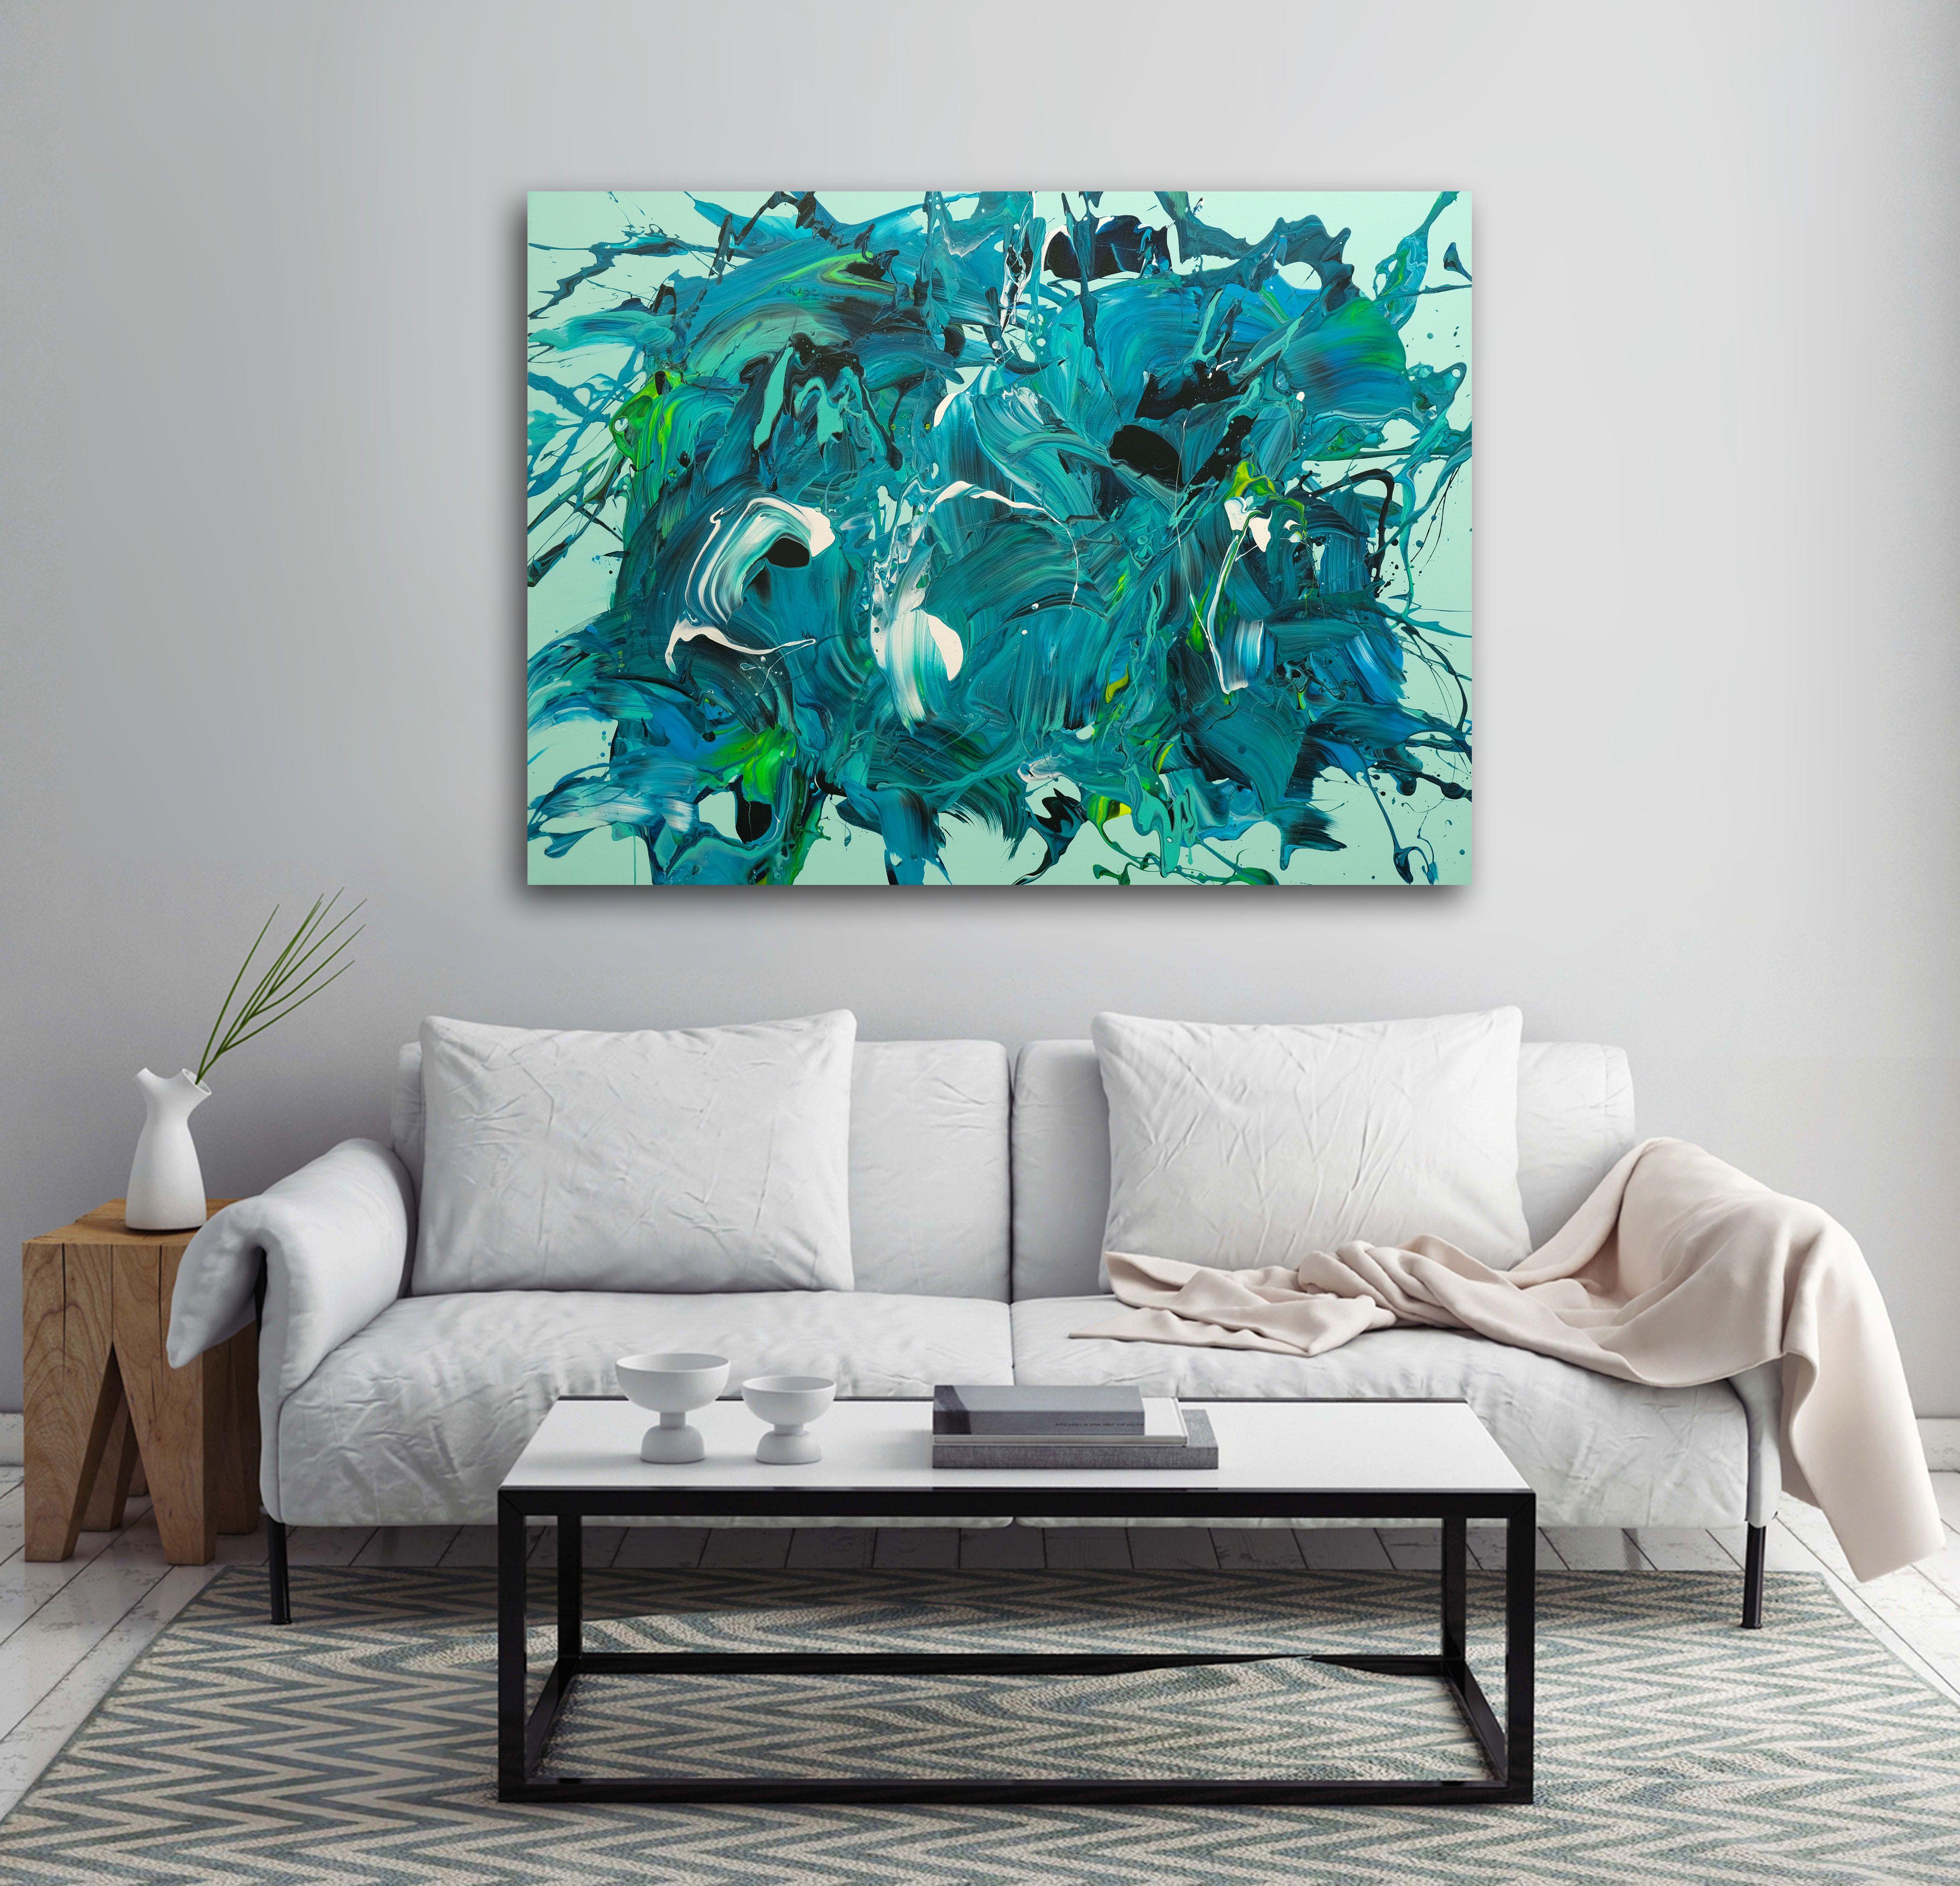 Original modern abstract painting.    * The artwork is signed on the back and includes a Certificate of Authenticity.  * The painting is done on stretched canvas using top quality acrylic paints and materials.  * It is ready to hang on the wall.  *